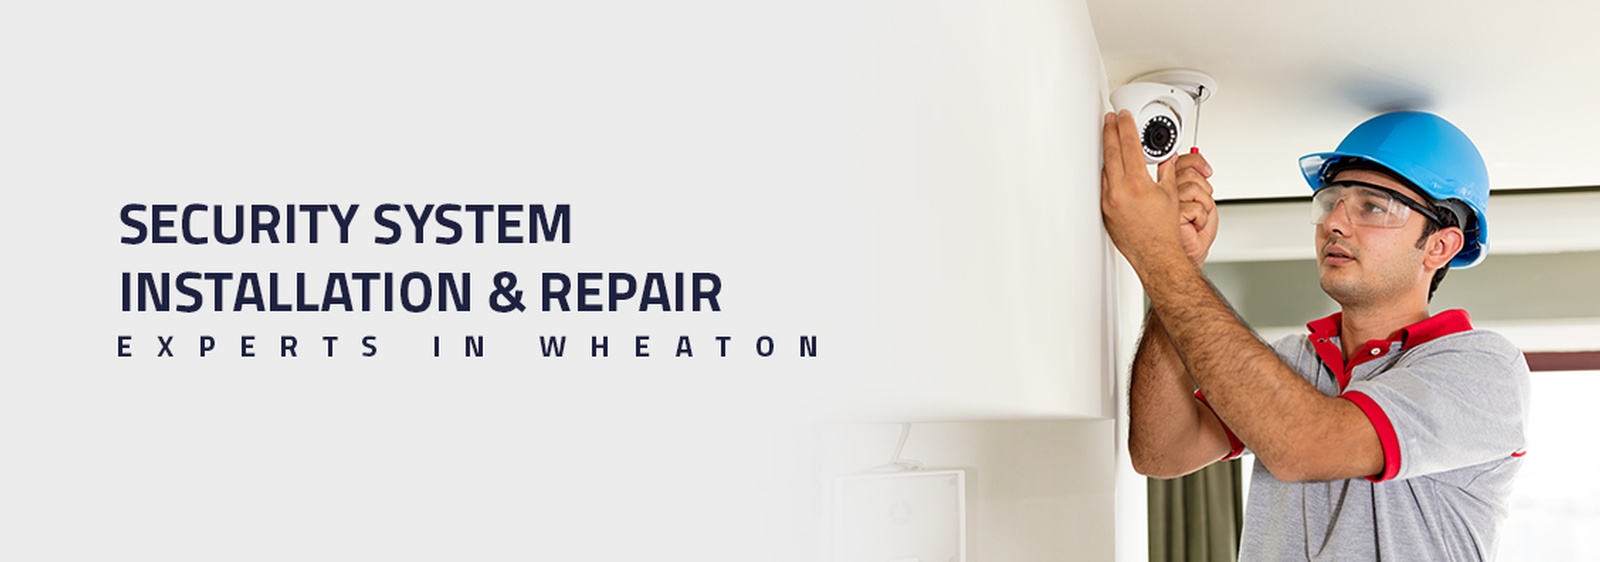 Security System Installation & Repair Experts in Wheaton